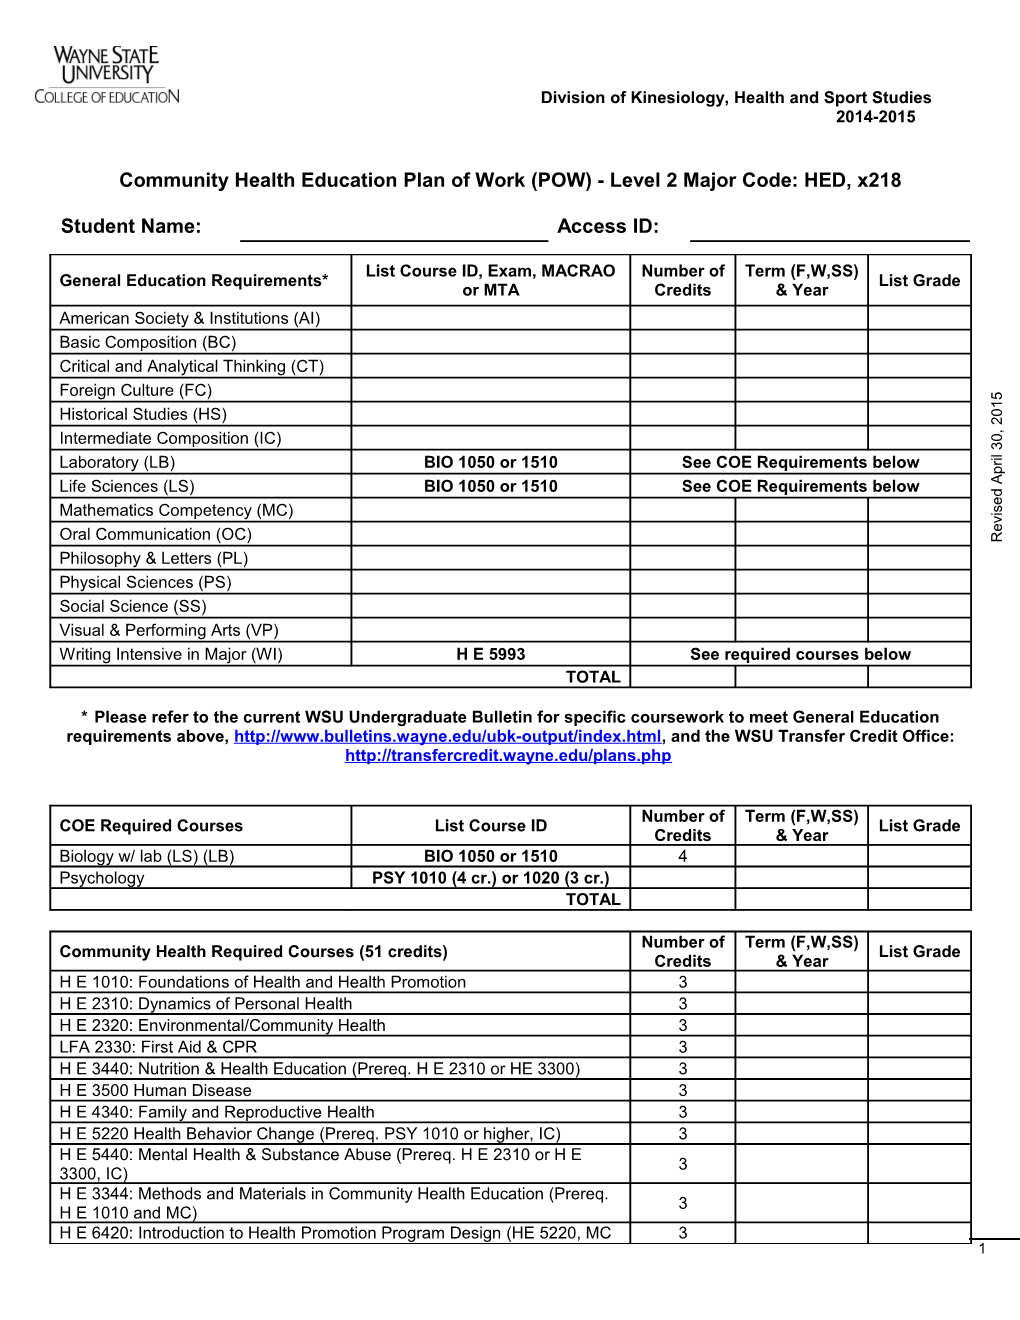 Community Health Education Plan of Work (POW) - Level 2 Major Code: HED, X218